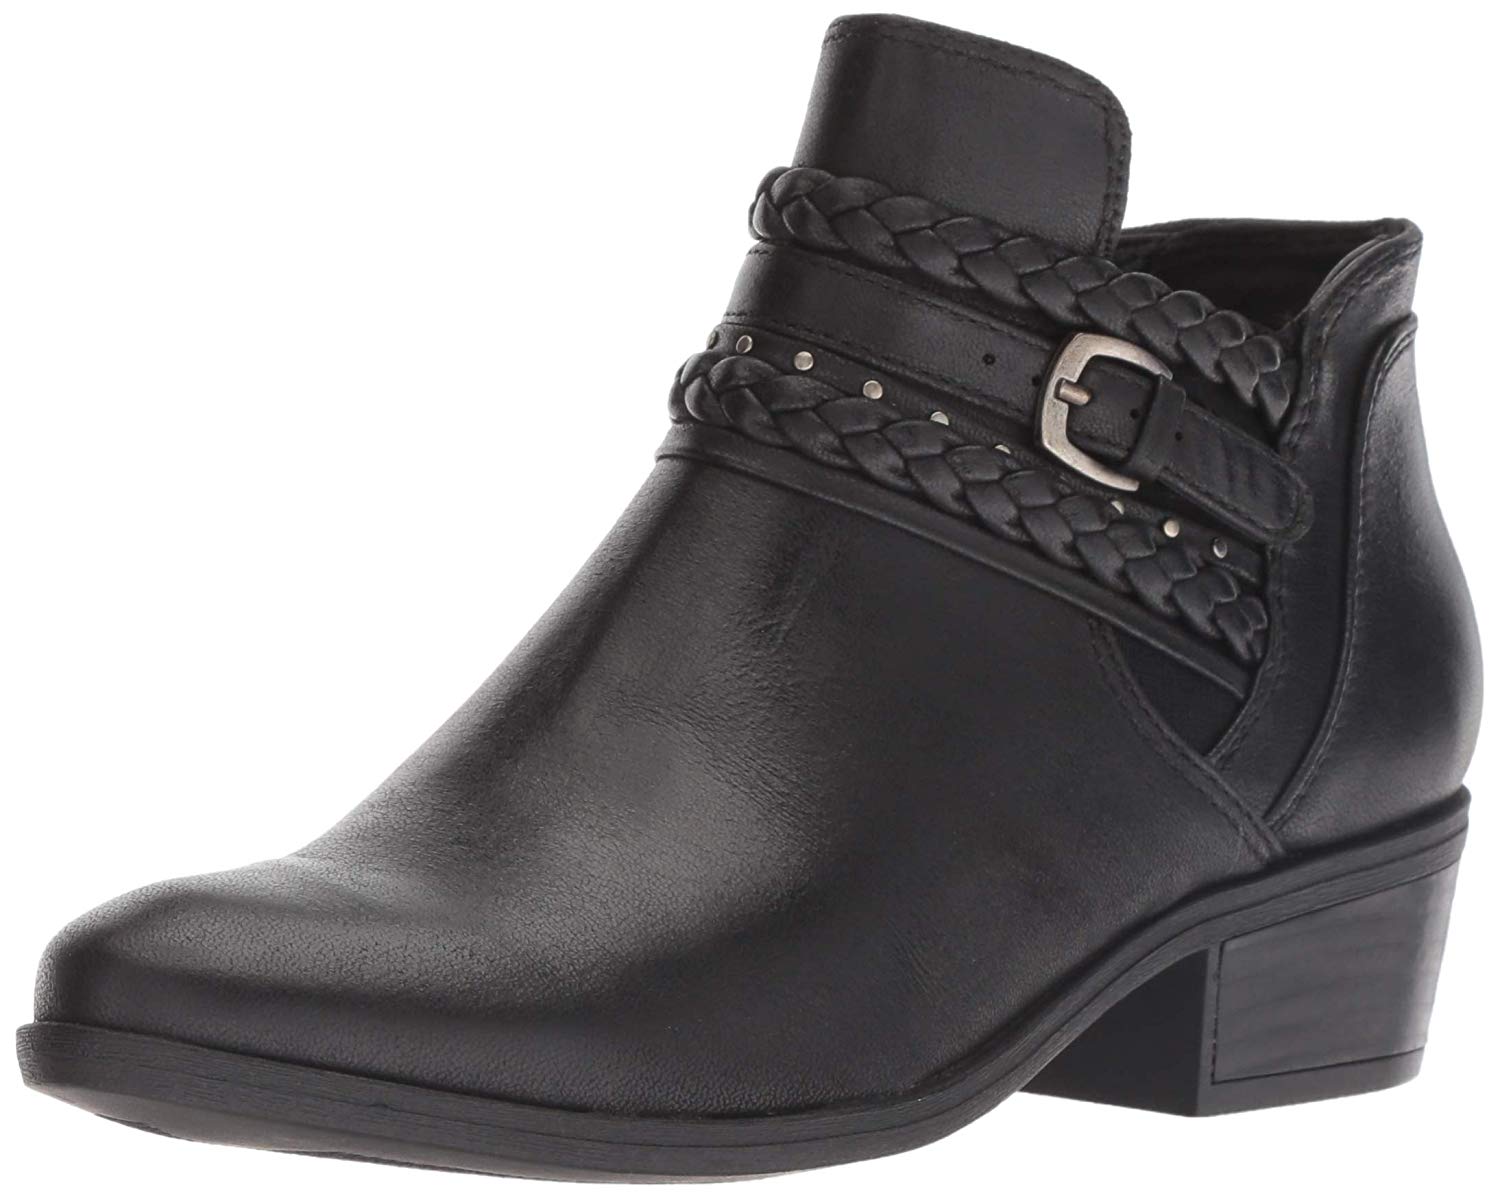 Bare Traps Womens Giles Round Toe Ankle Fashion Boots, Black, Size 5.0 ...